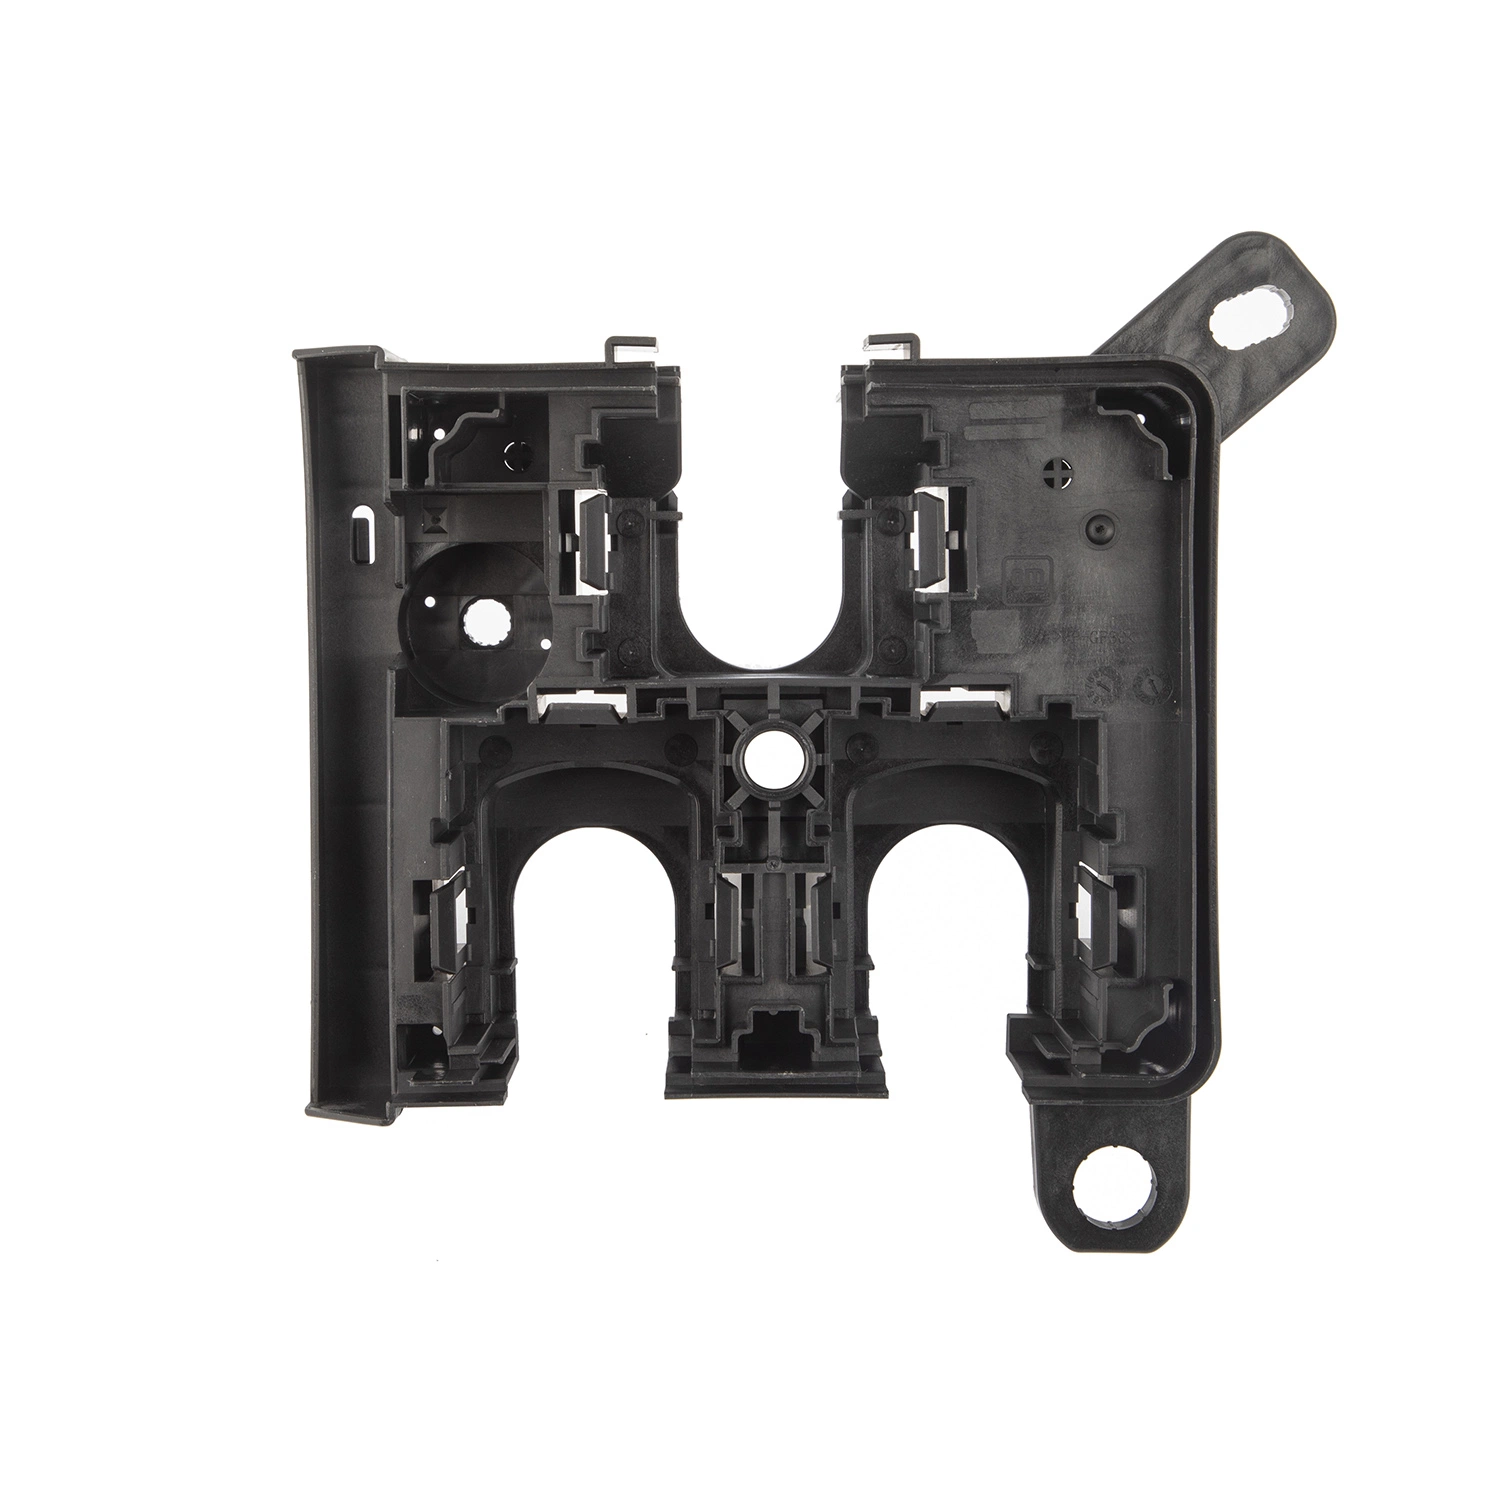 Vehicle Structural Protection High Strength Plastic Bracket of Various Specifications